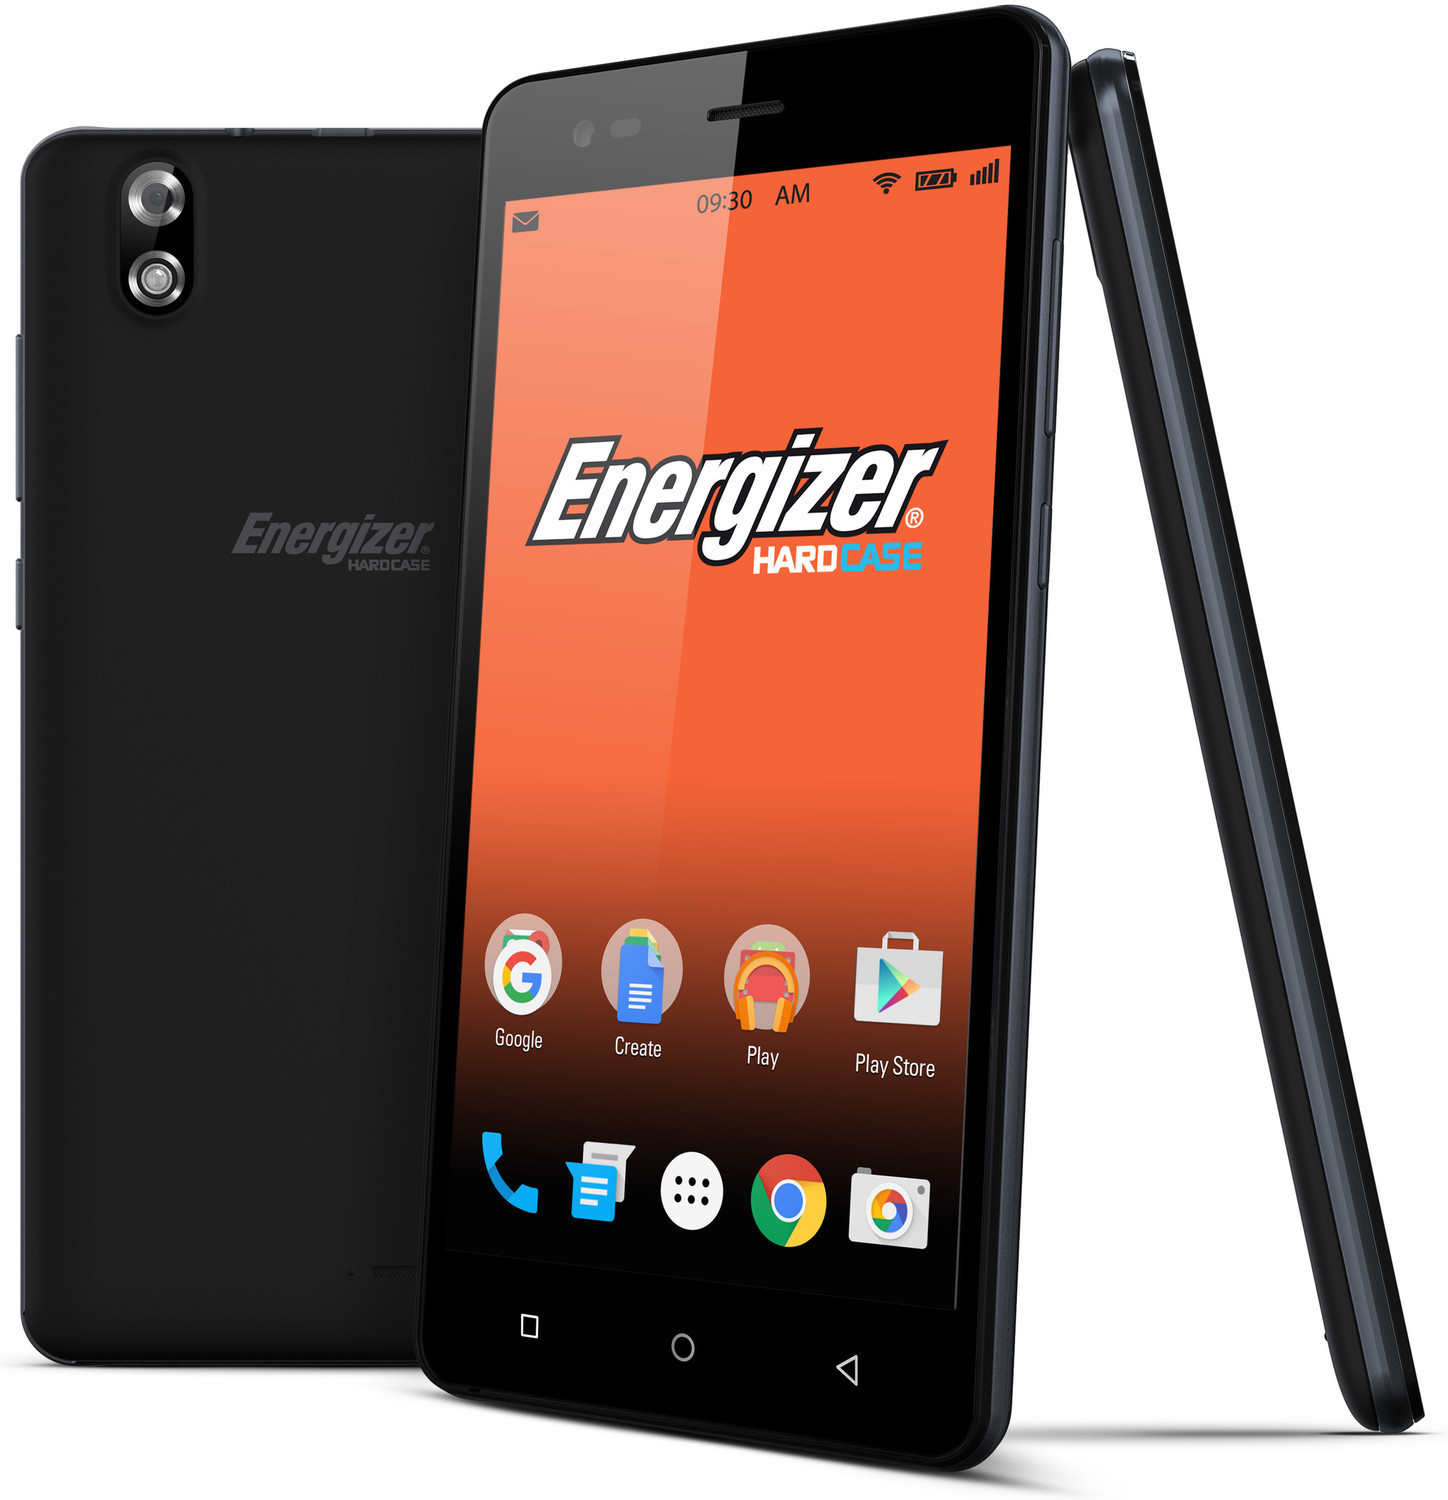 Energizer Energy S550 - Specs and Price - Phonegg